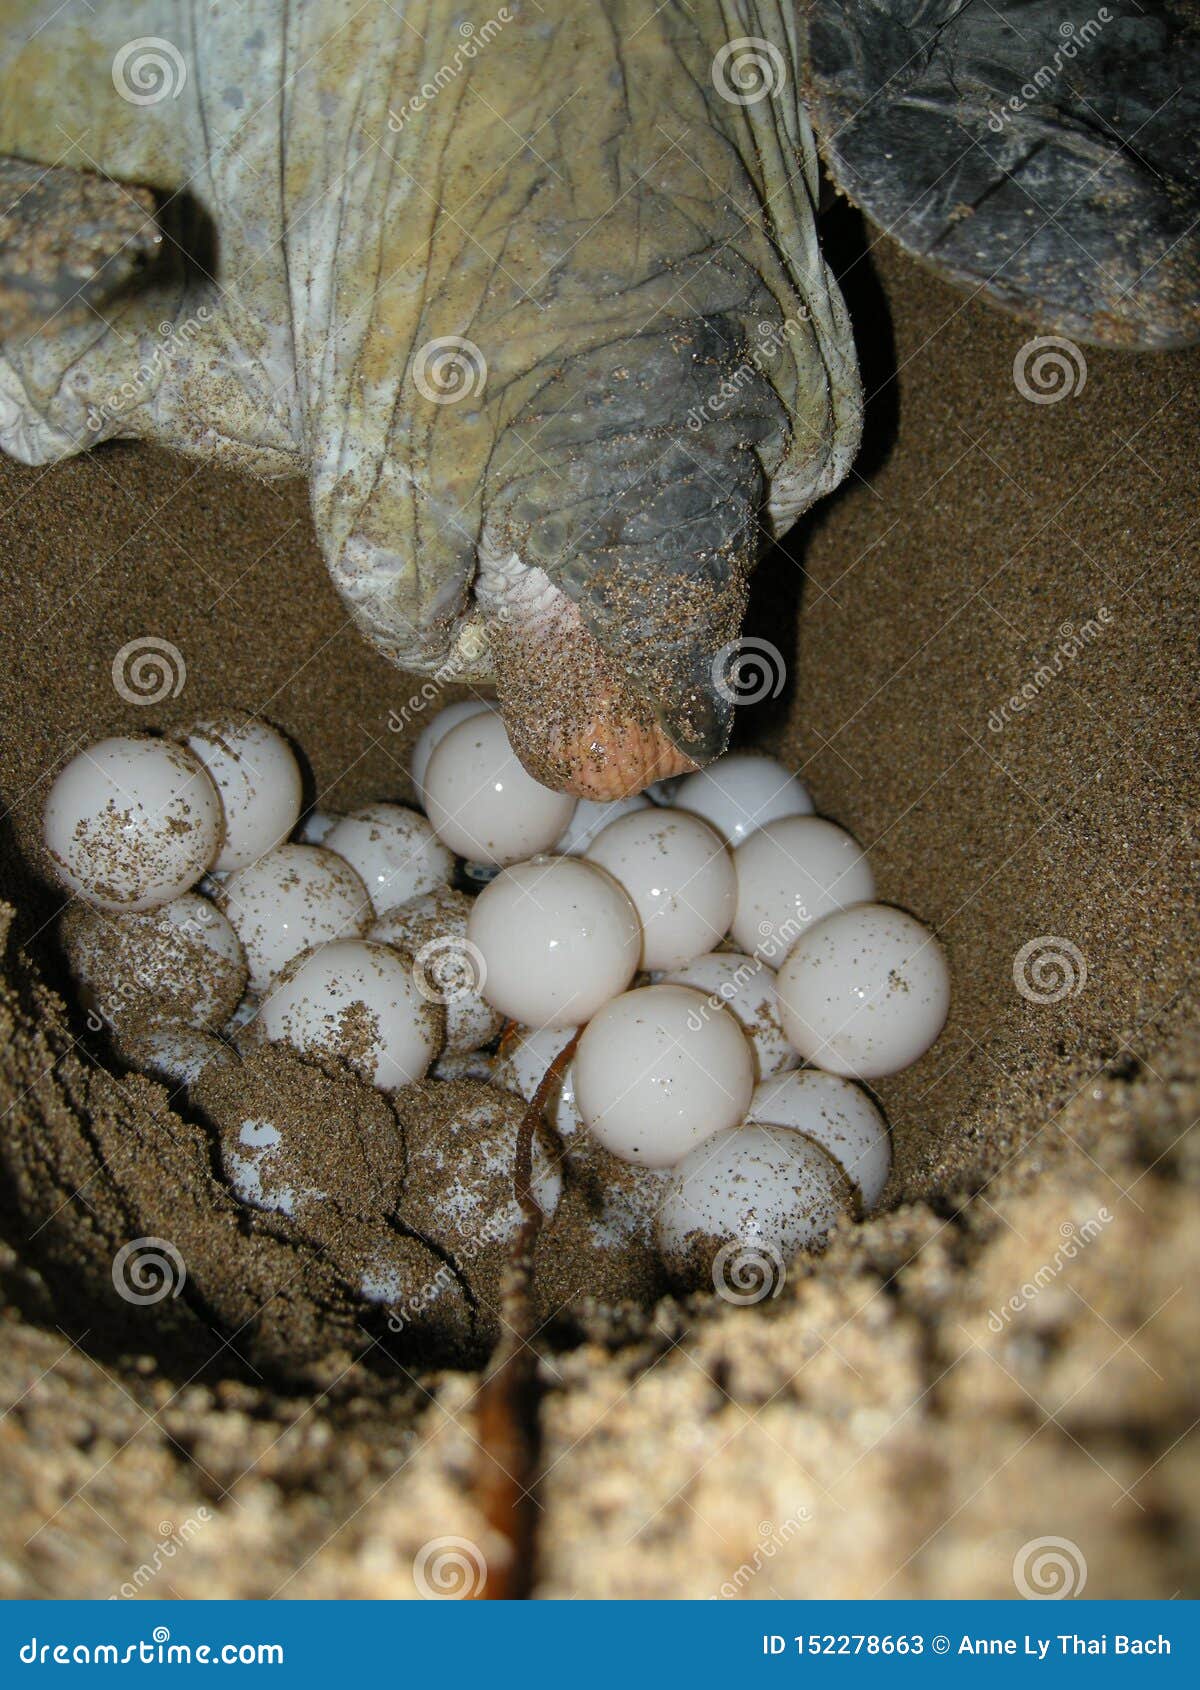 Green Sea Turtles Laying the Eggs on the Beach Stock Image - Image of